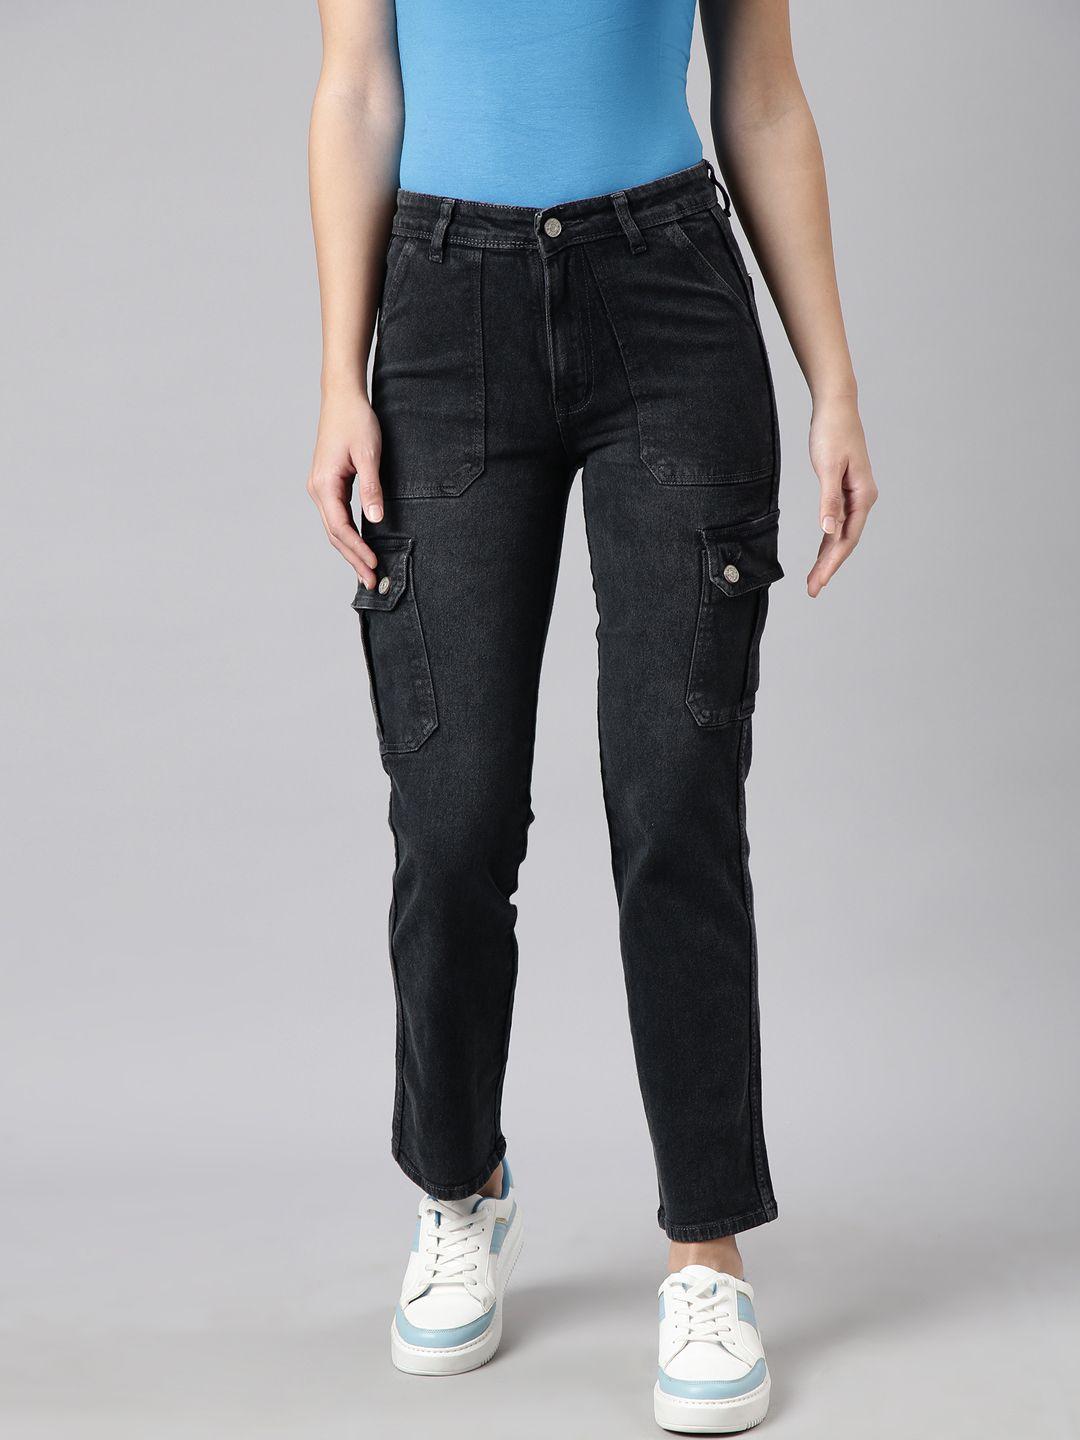 showoff women jean straight fit clean look light fade cargo jeans